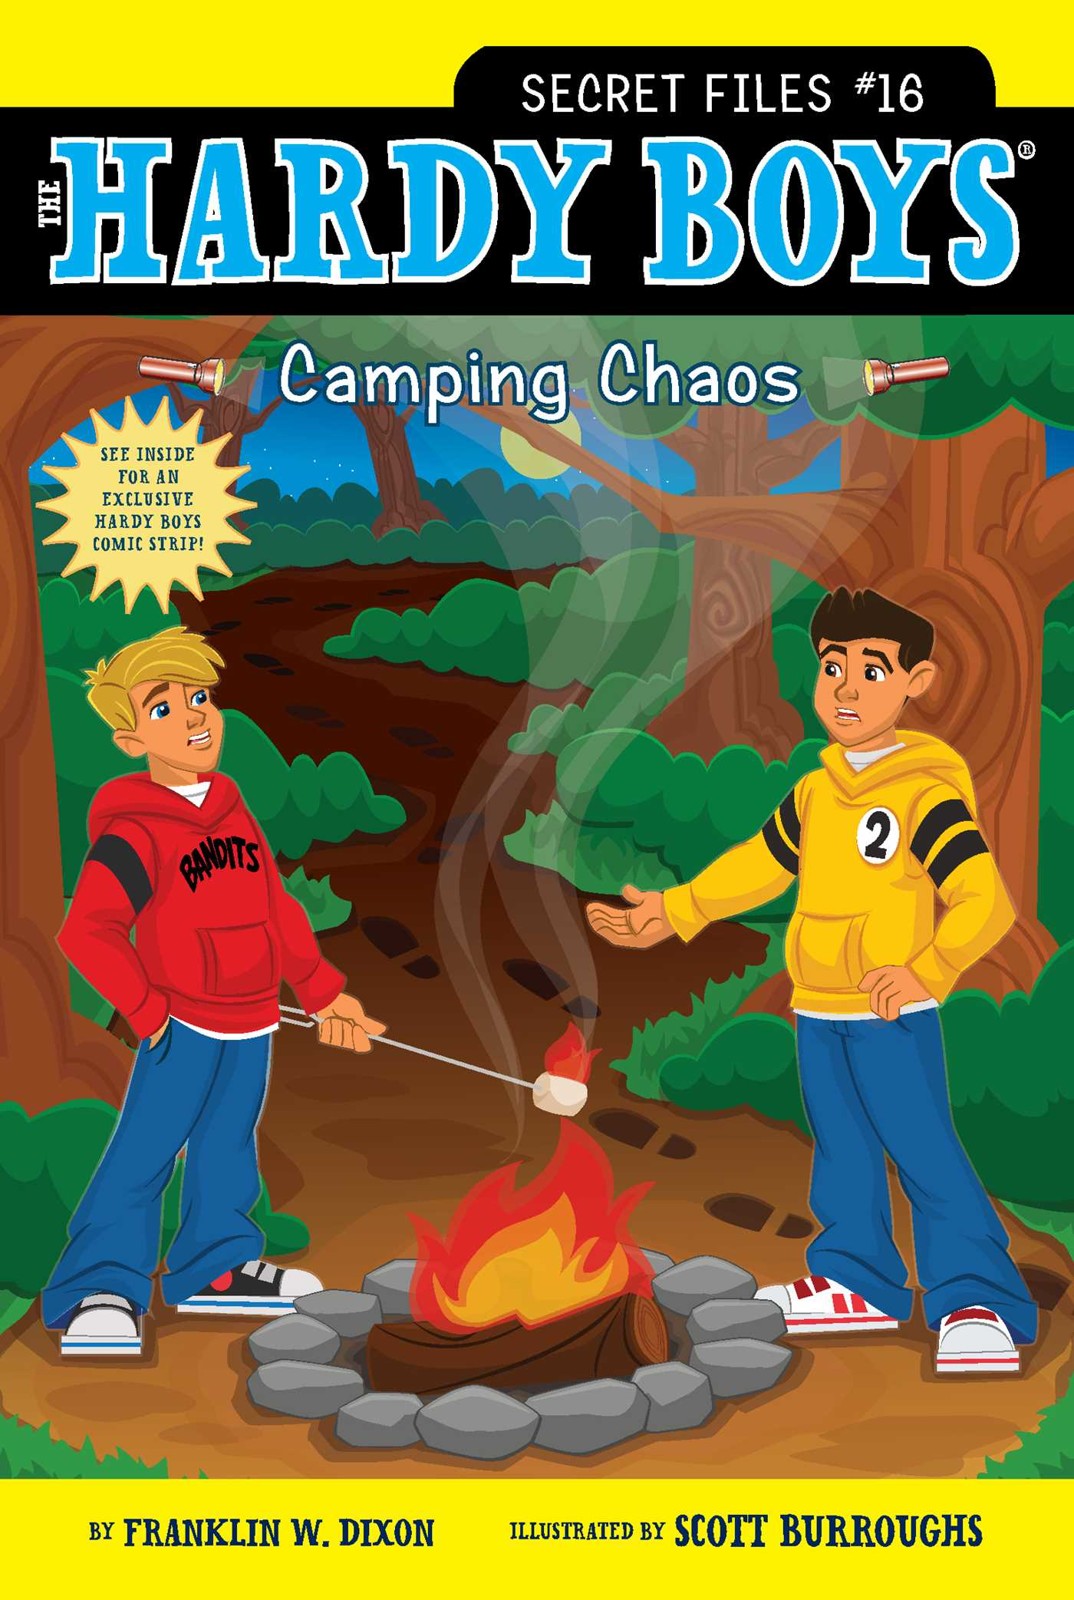 Camping Chaos by Franklin W. Dixon